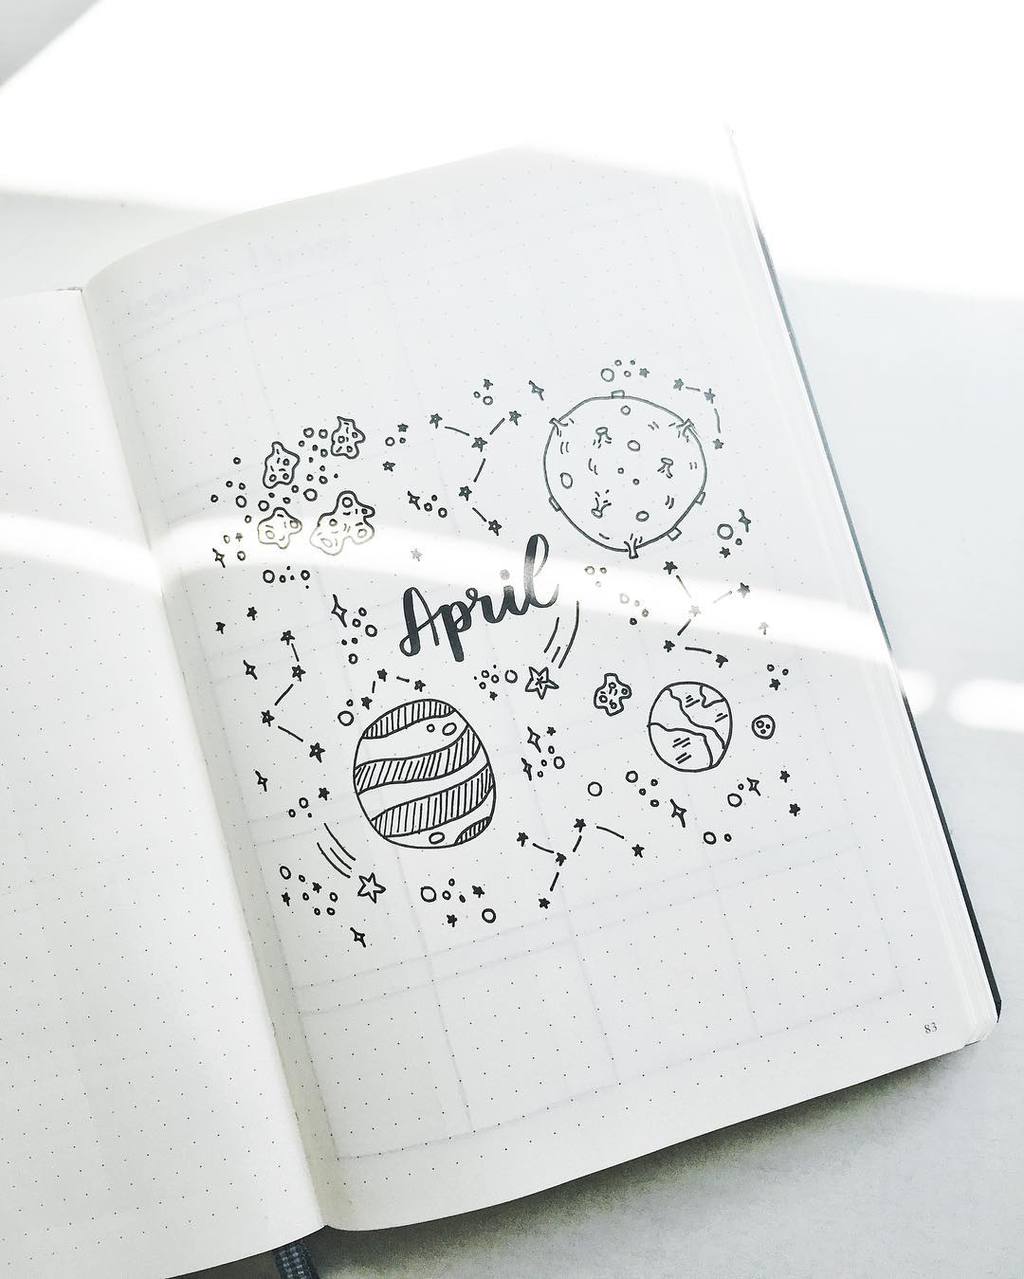 Space and Galaxy Bullet Journal Theme Inspirations - cover page by @casslydoodles | Masha Plans